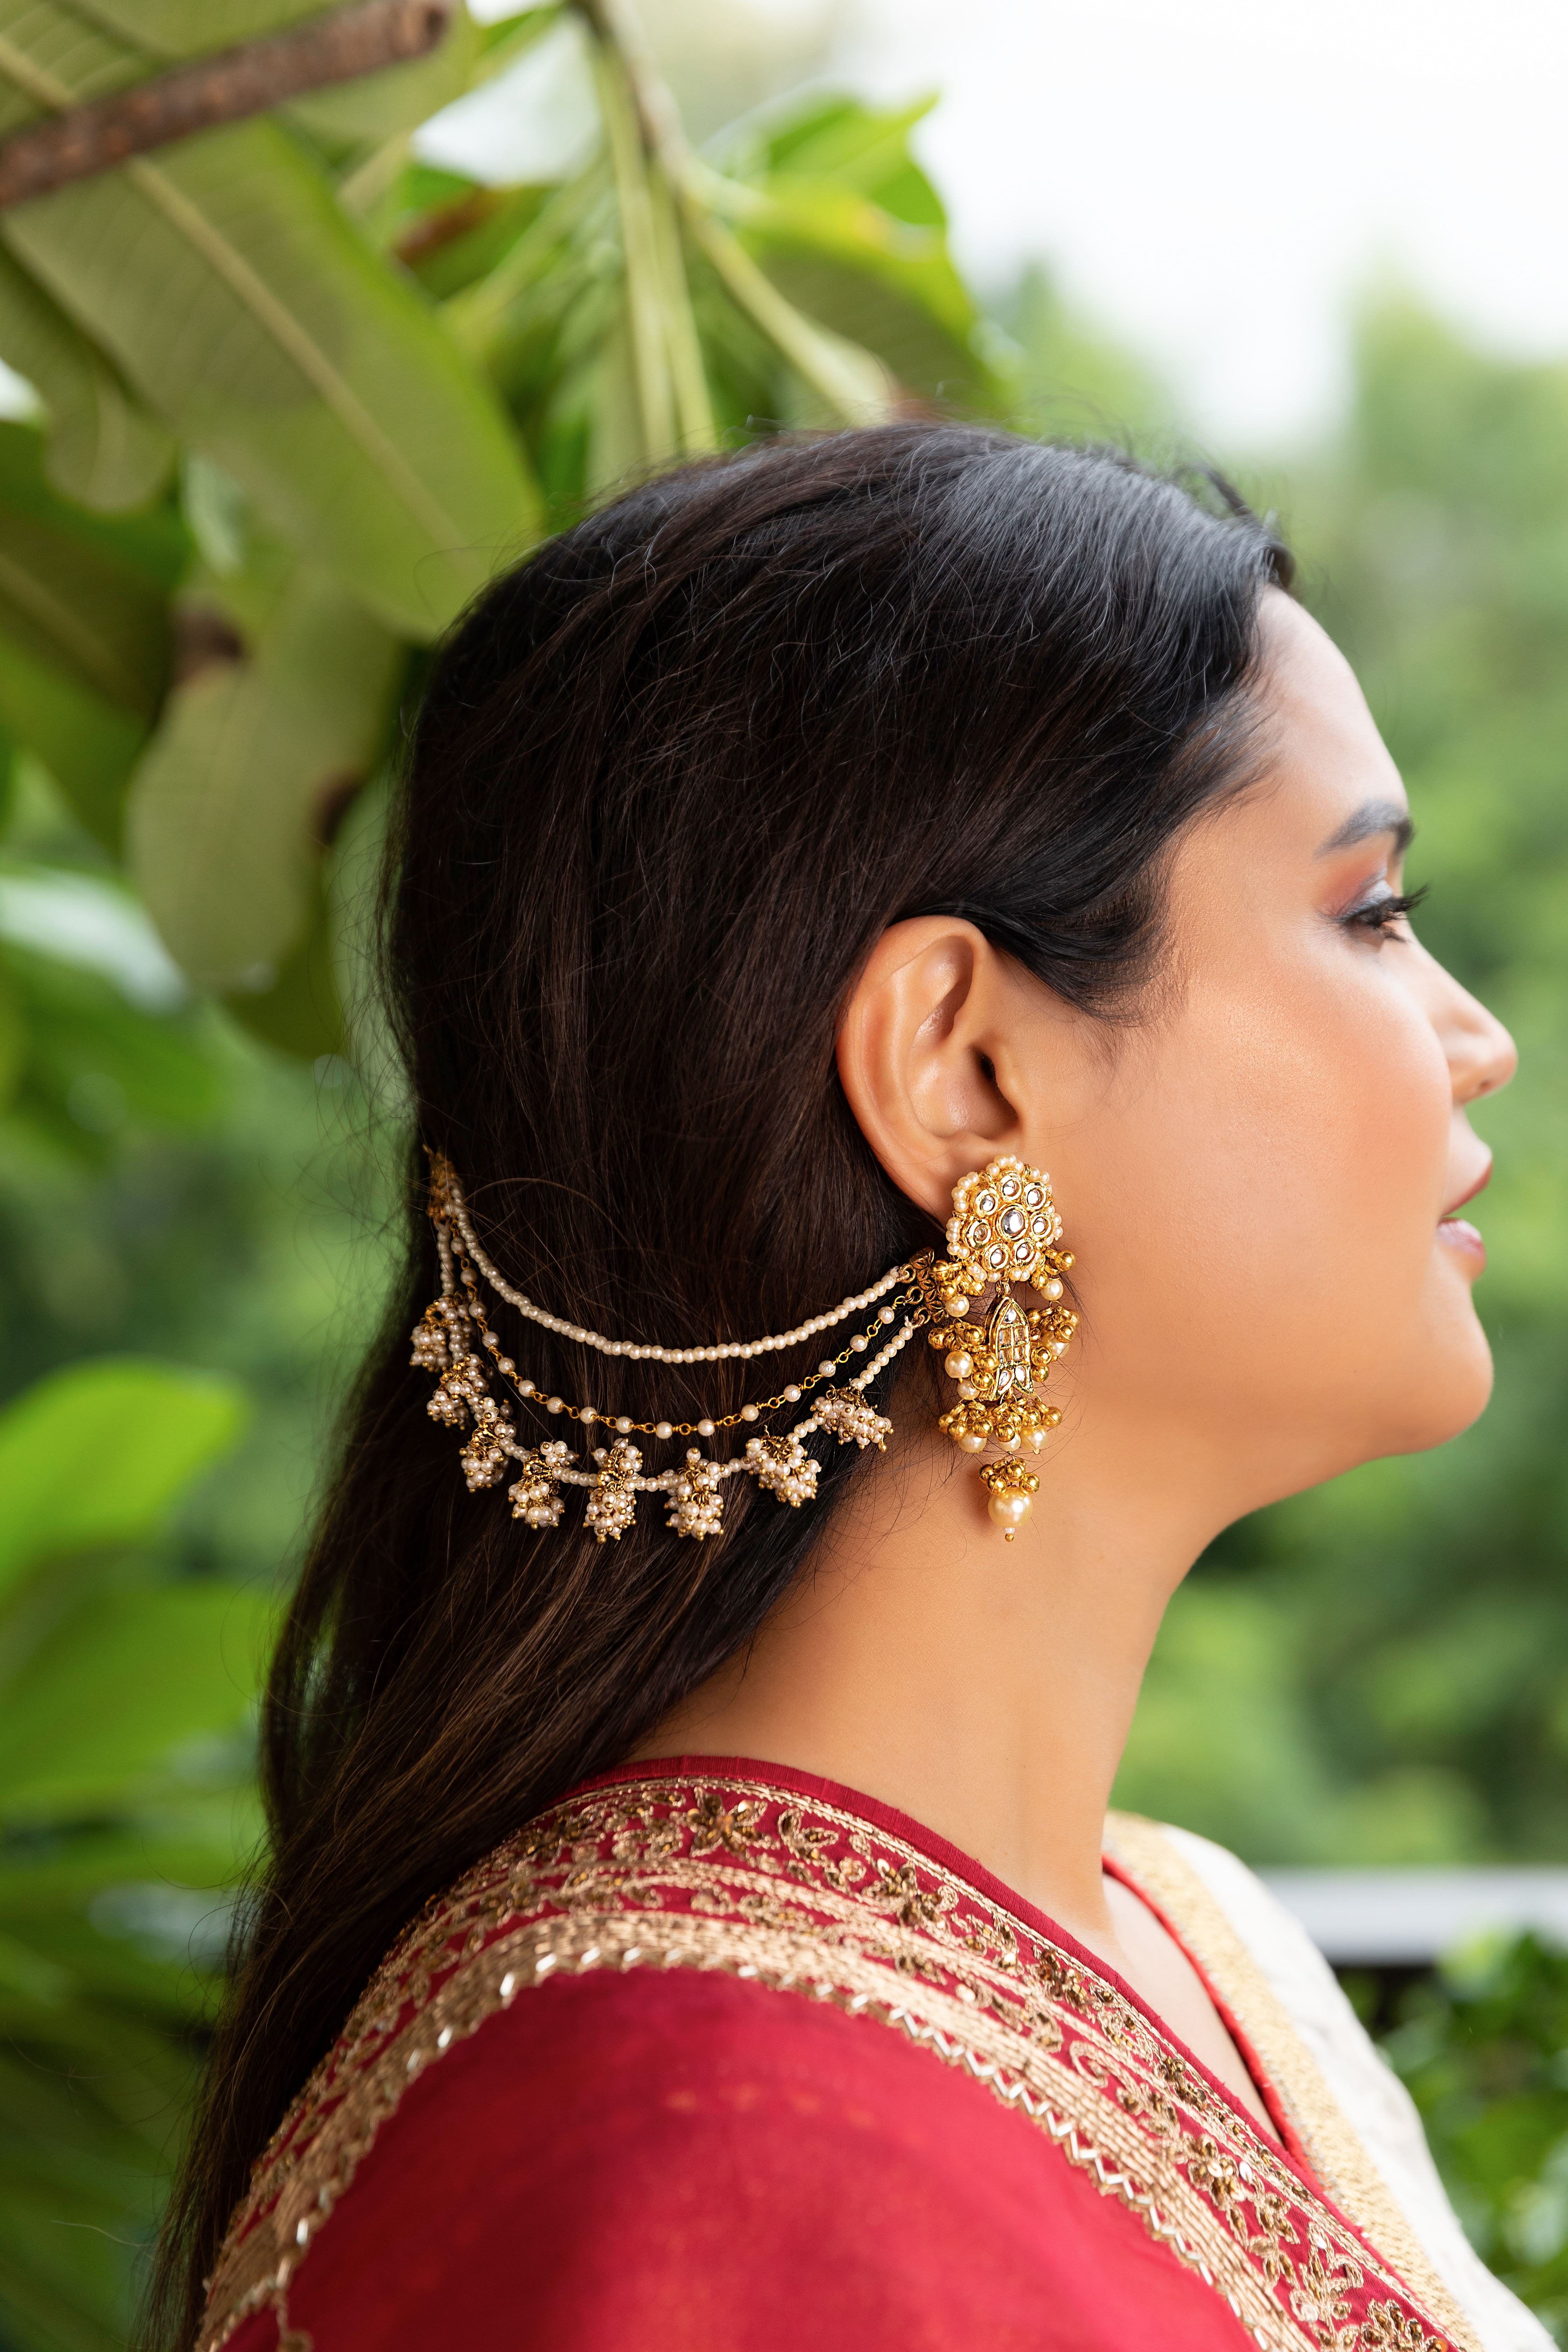 How to Choose Earrings to Match Your Wedding Hairstyle